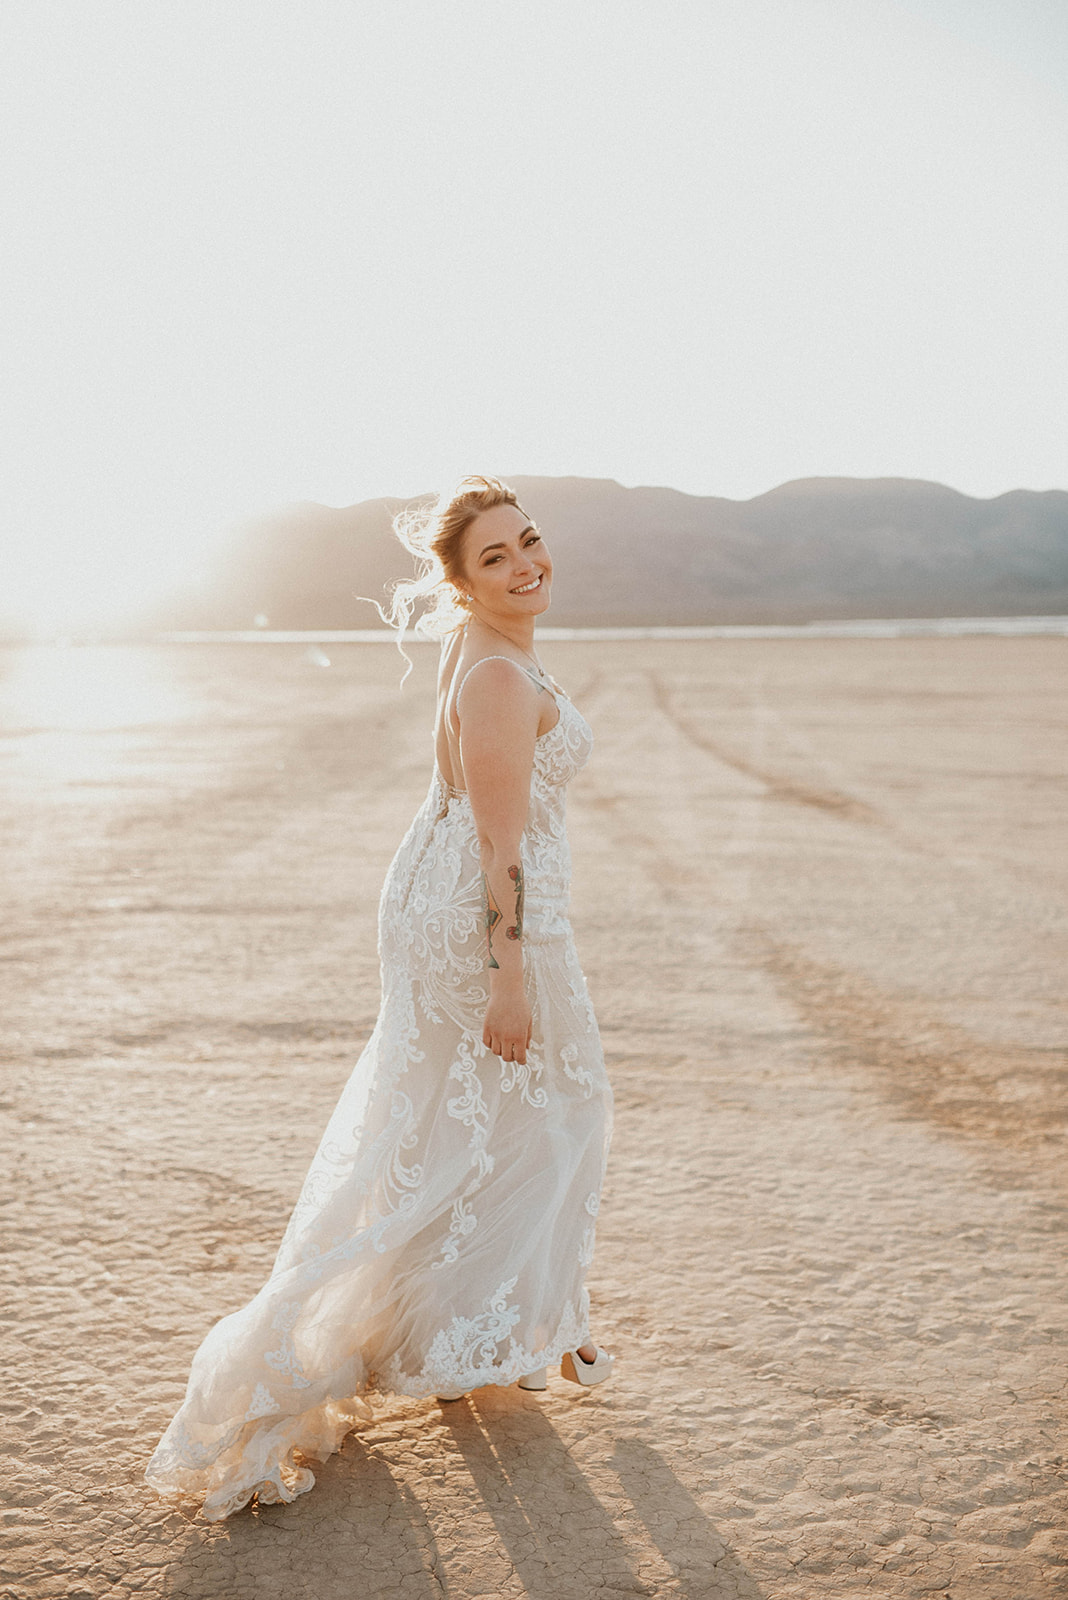 First Stop! A Little White Chapel bride walking in the desert with a beautiful smile the sunset right behind her. The bride wears a lace fitted bridal gown with buttons down the back and thin straps. The gown has a small train behind it. 